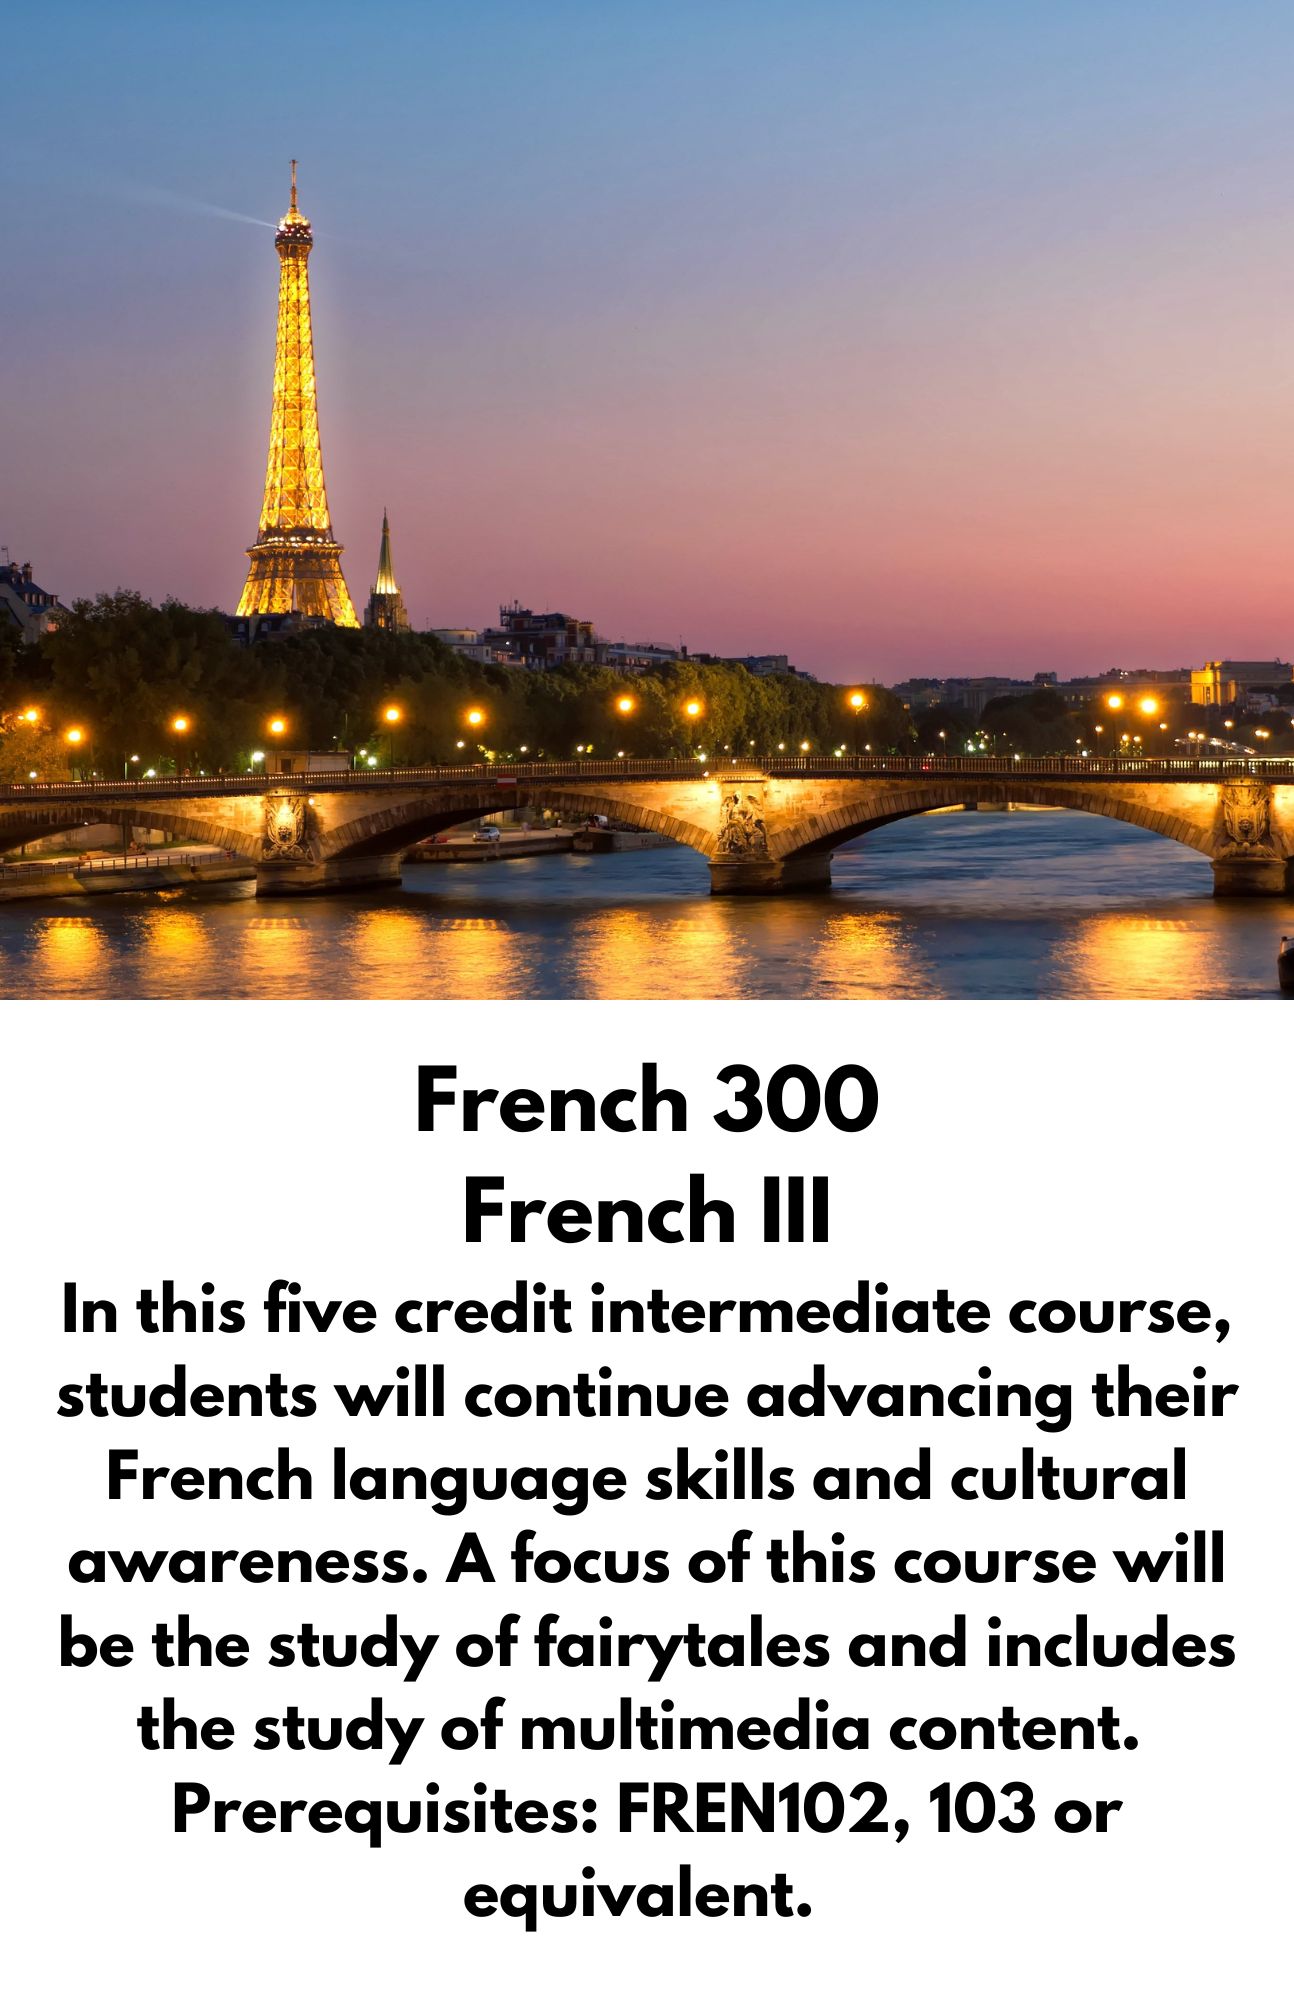 French 300 French III In this five credit intermediate course, students will continue advancing their French language skills and cultural awareness. A focus of this course will be the study of fairytales and includes the study of multimedia content.  Prerequisites: FREN102, 103 or equivalent.